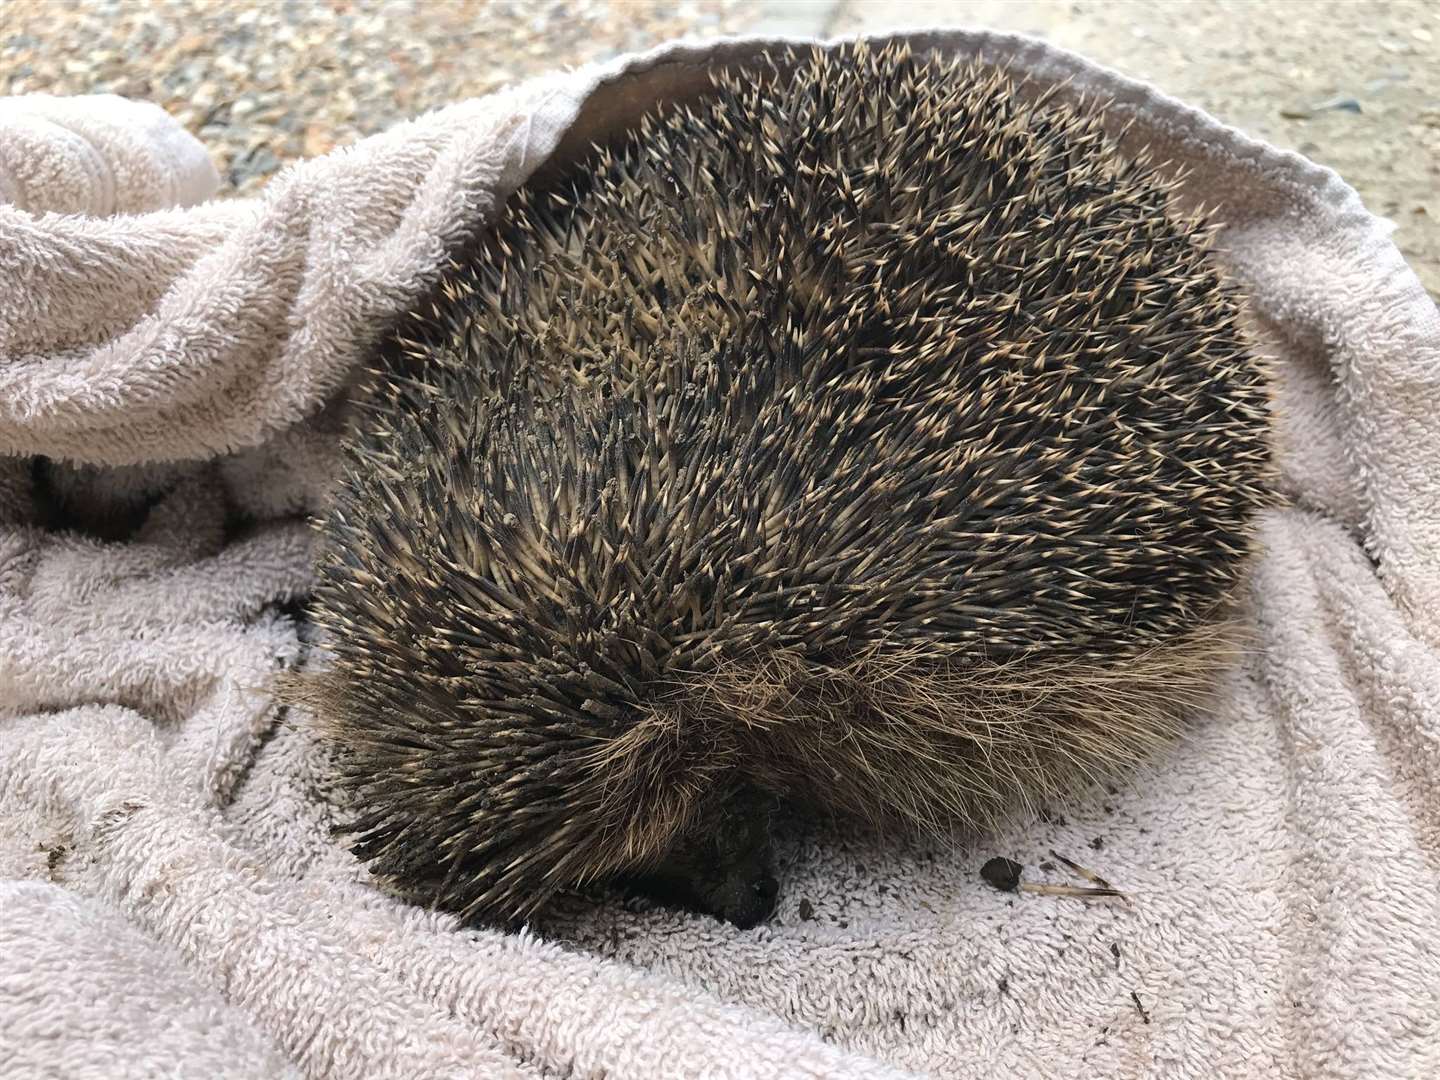 The RSPCA and fire brigade had to save the hedgehog from it's prickly situation. Picture: RSPCA